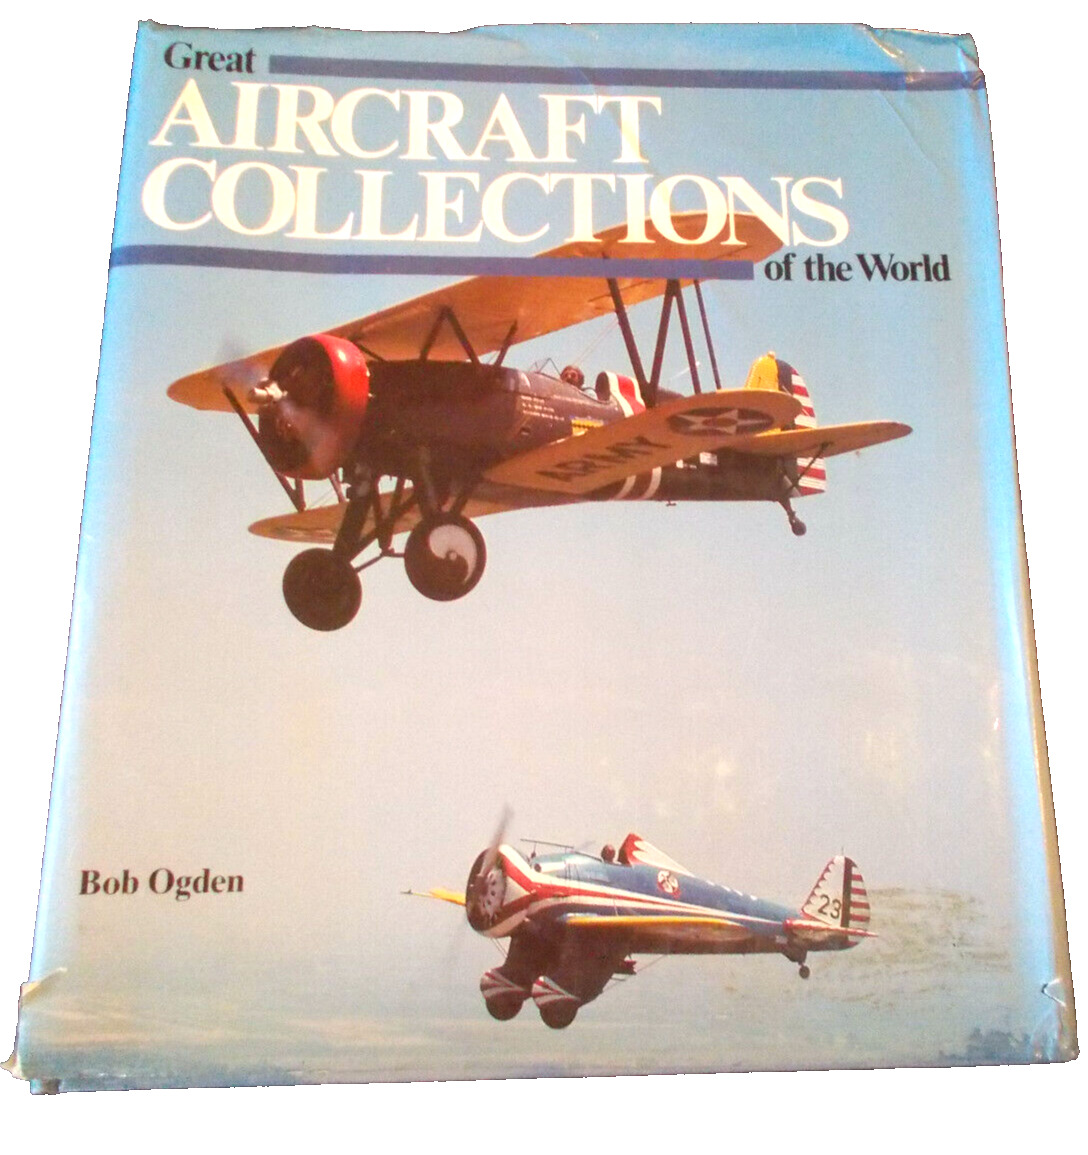 1986-GREAT AIRCRAFT COLLECTIONS OF THE WORLD-BOB OGDEN-Hardback & Dust Jacket